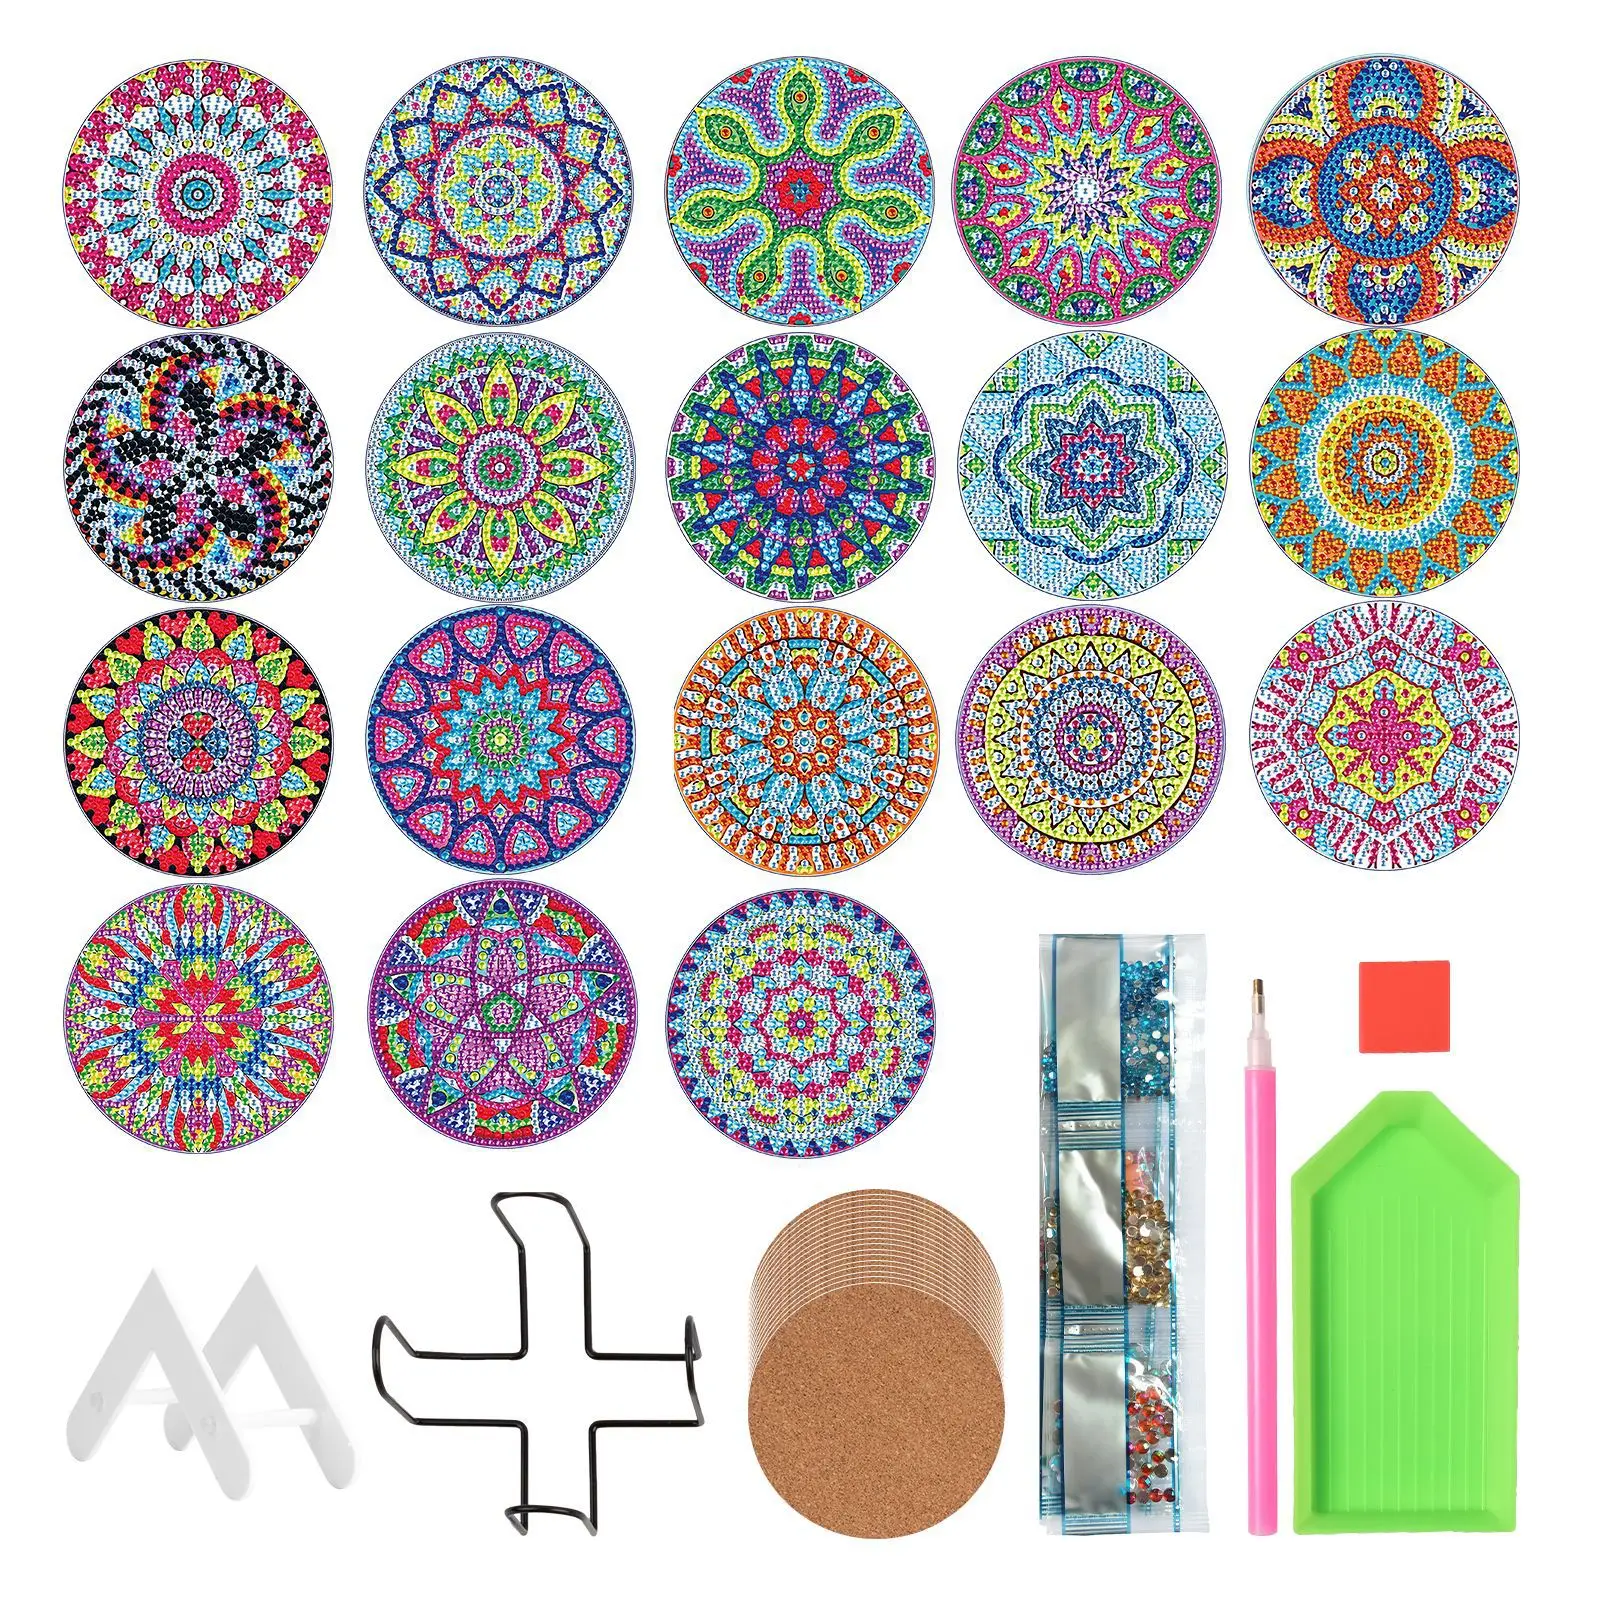 

18Pcs/set New DIY Diamond Painting Coaster Mandala Drink Cup Cushion Non-slip Table Placemat Insulation Pad Kitchen Accessories